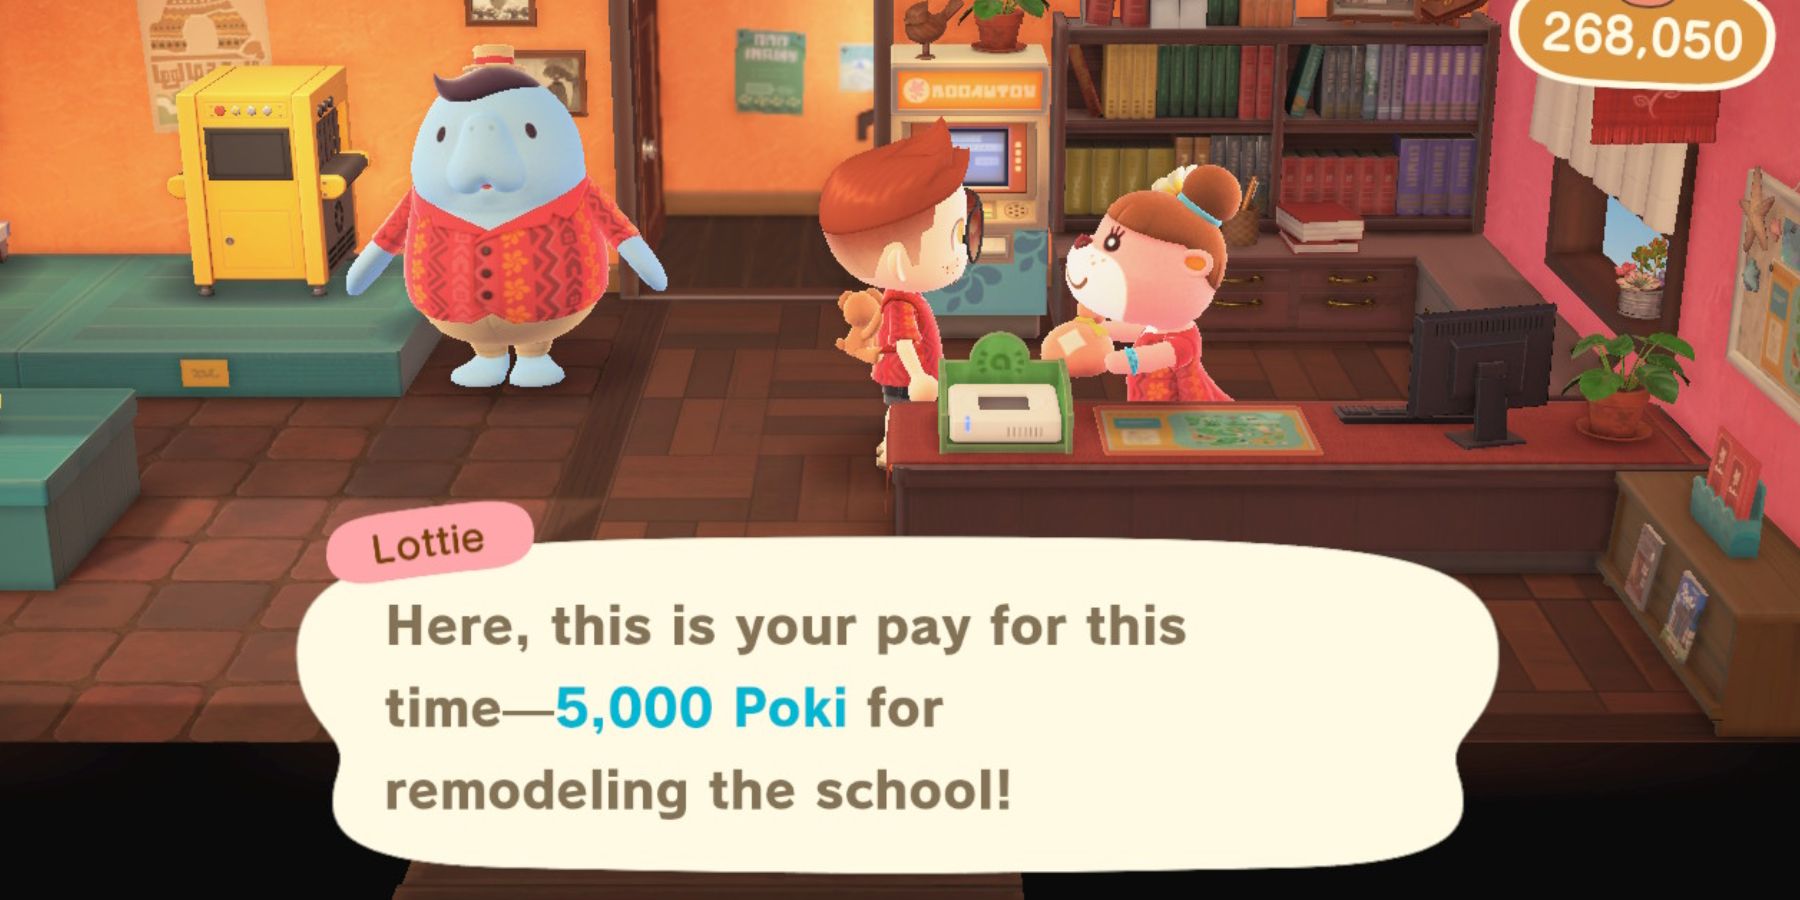 Players earn 5,000 Poki for remodeling facilities in Animal Crossing Happy Home Paradise.